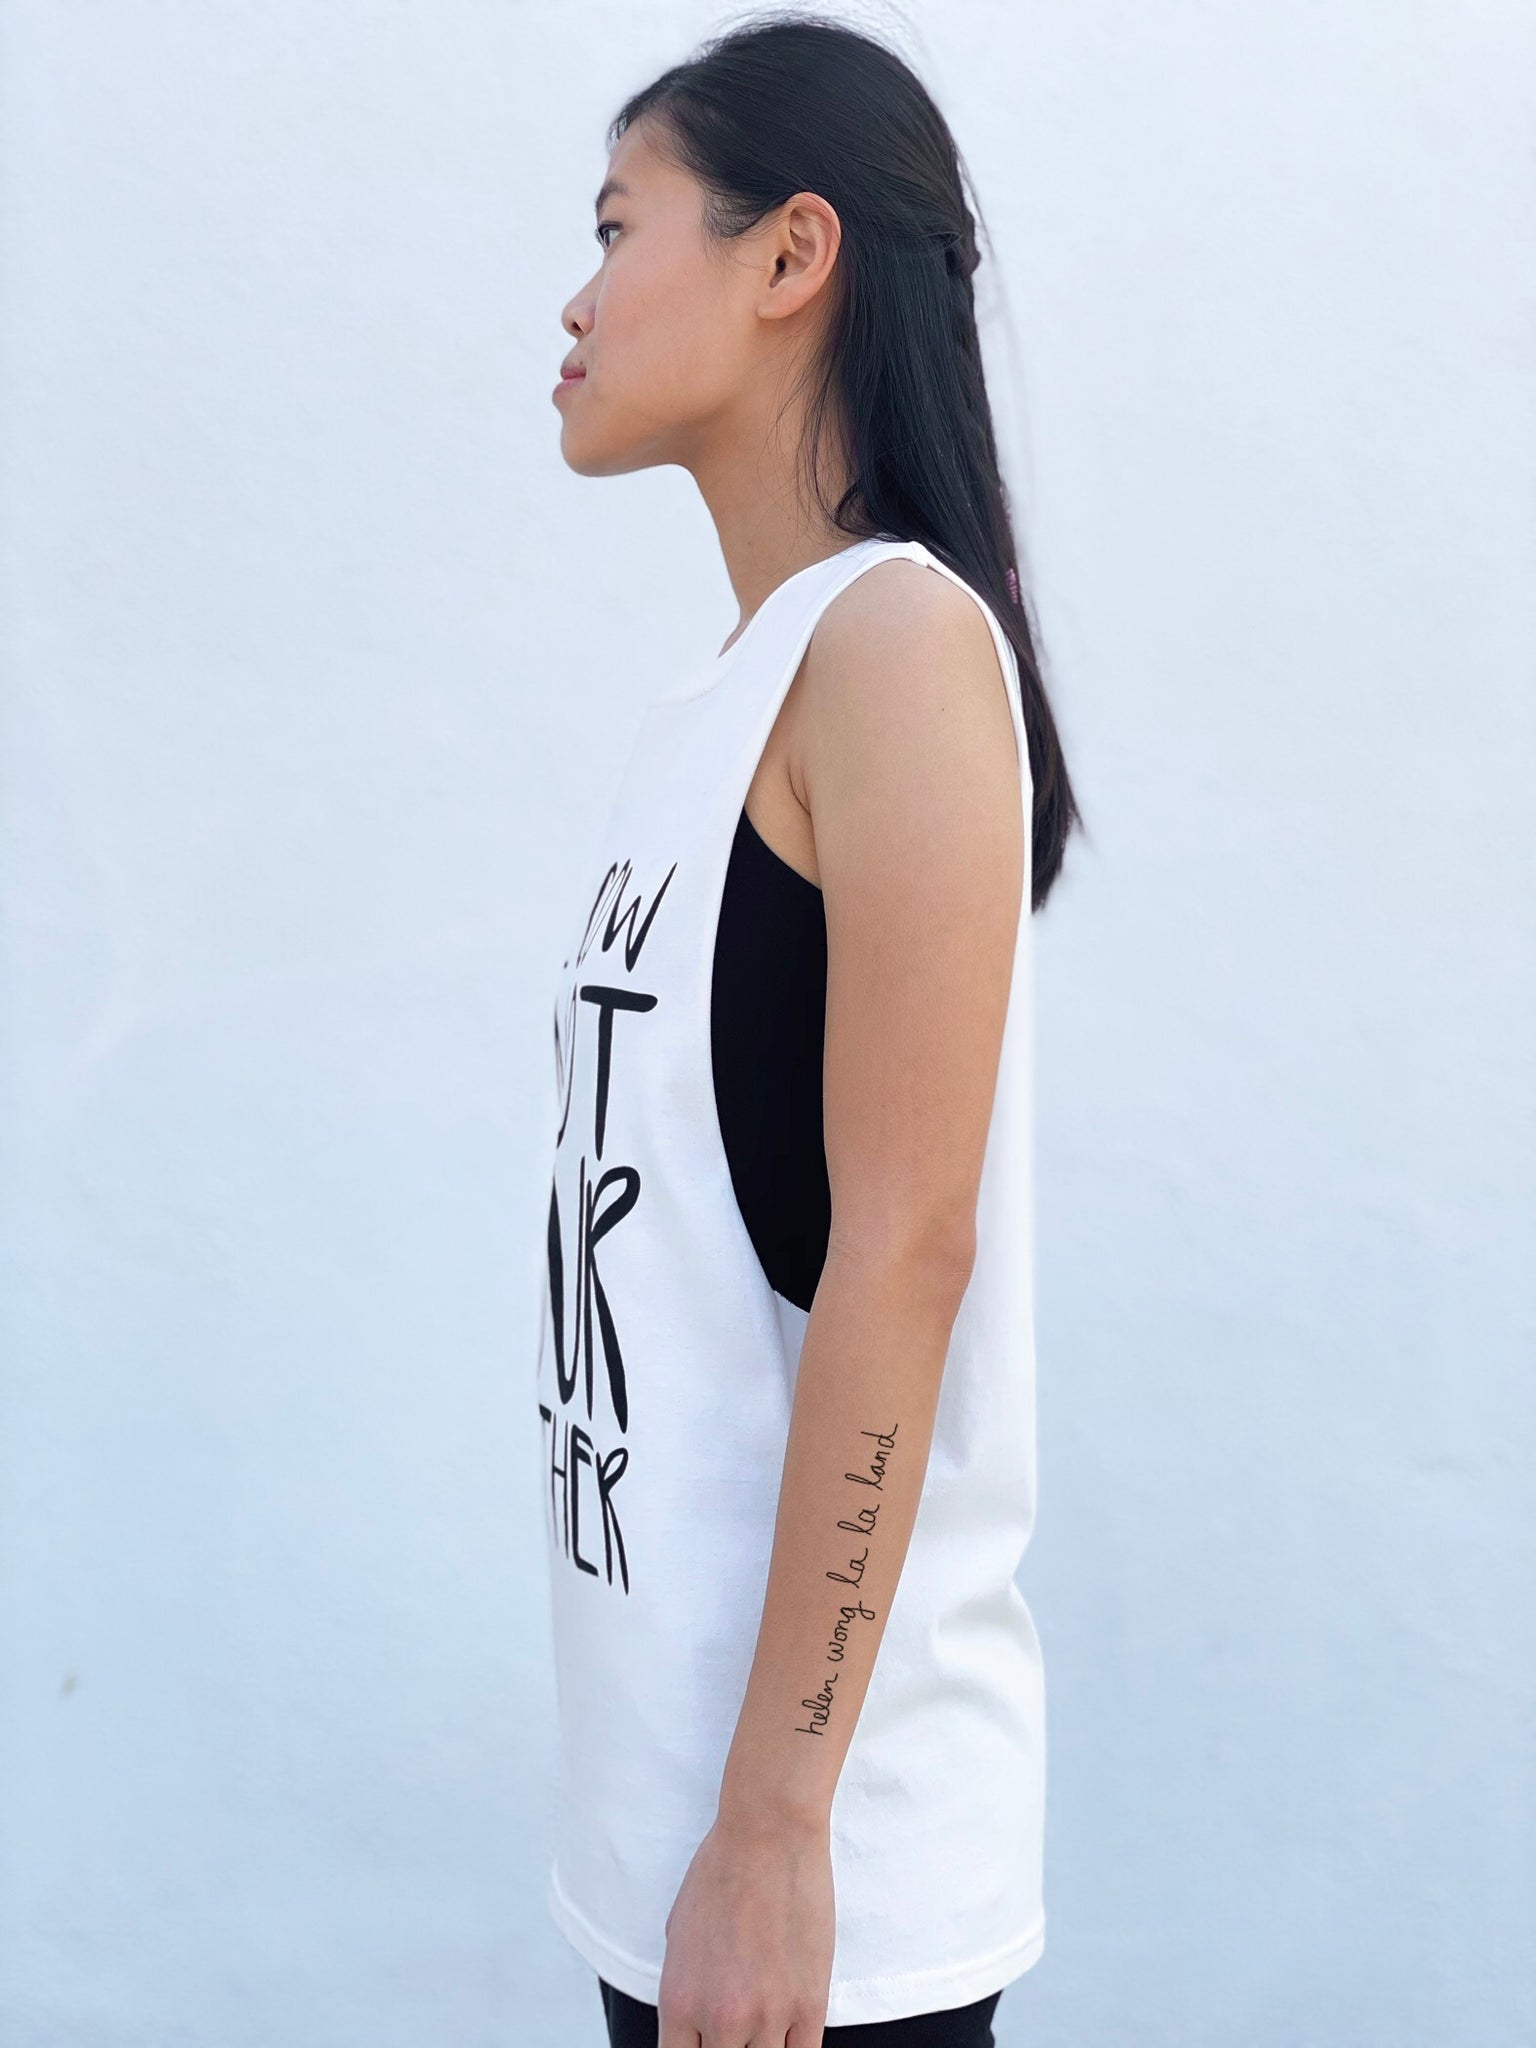 (S/S 2020) The Cow Is Not Your Mother sleeveless tee in CREAM ORGANIC